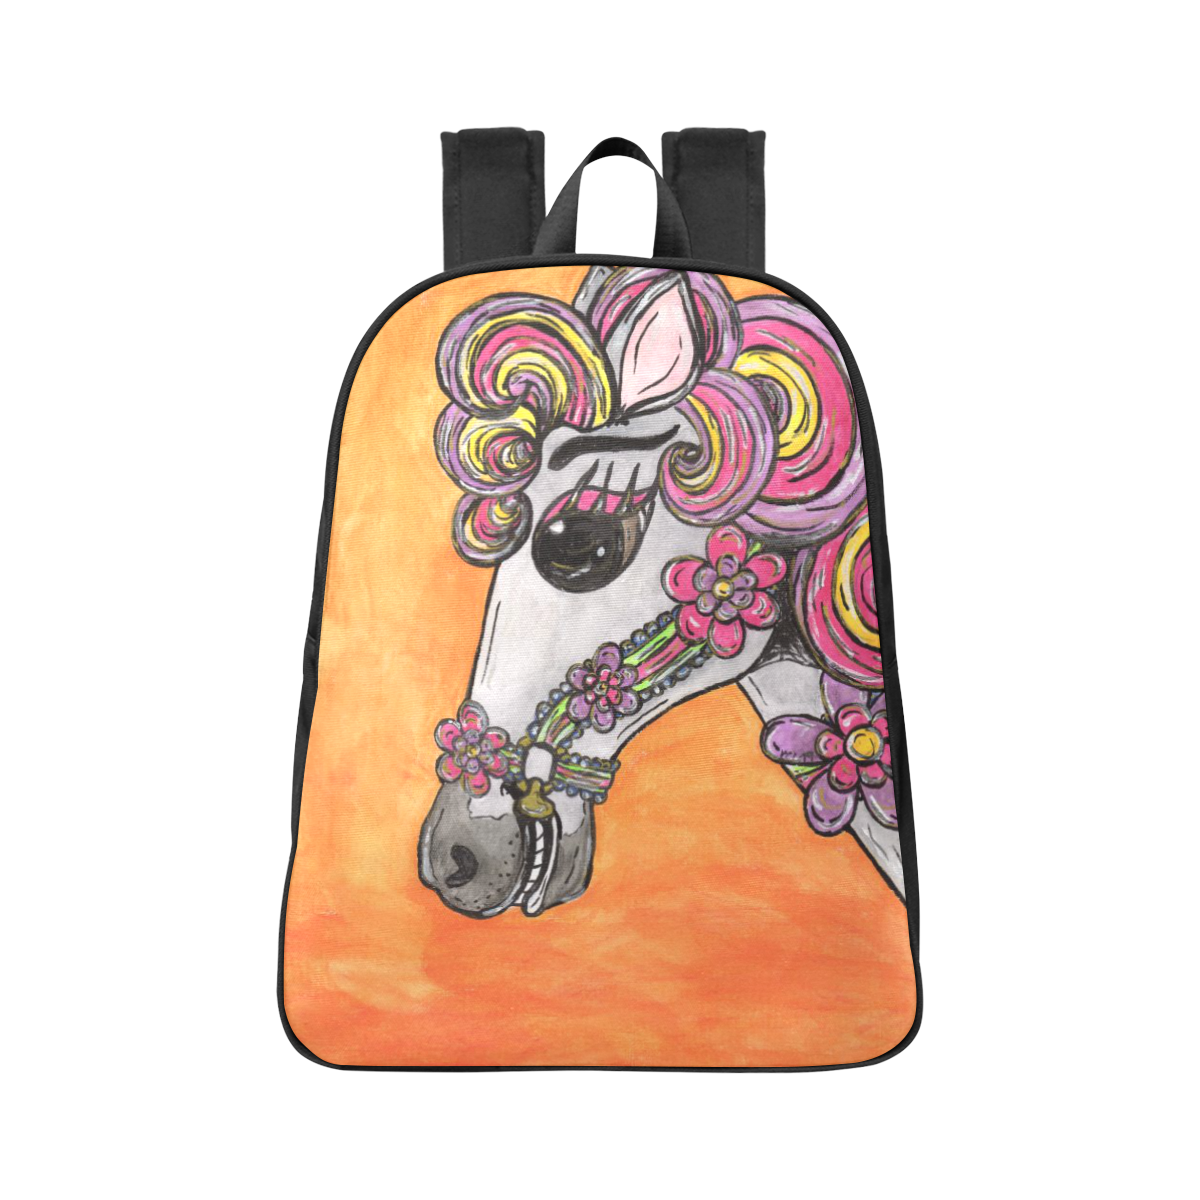 Carousel Horse Fabric Backpack Fabric School Backpack (Model 1682) (Large)